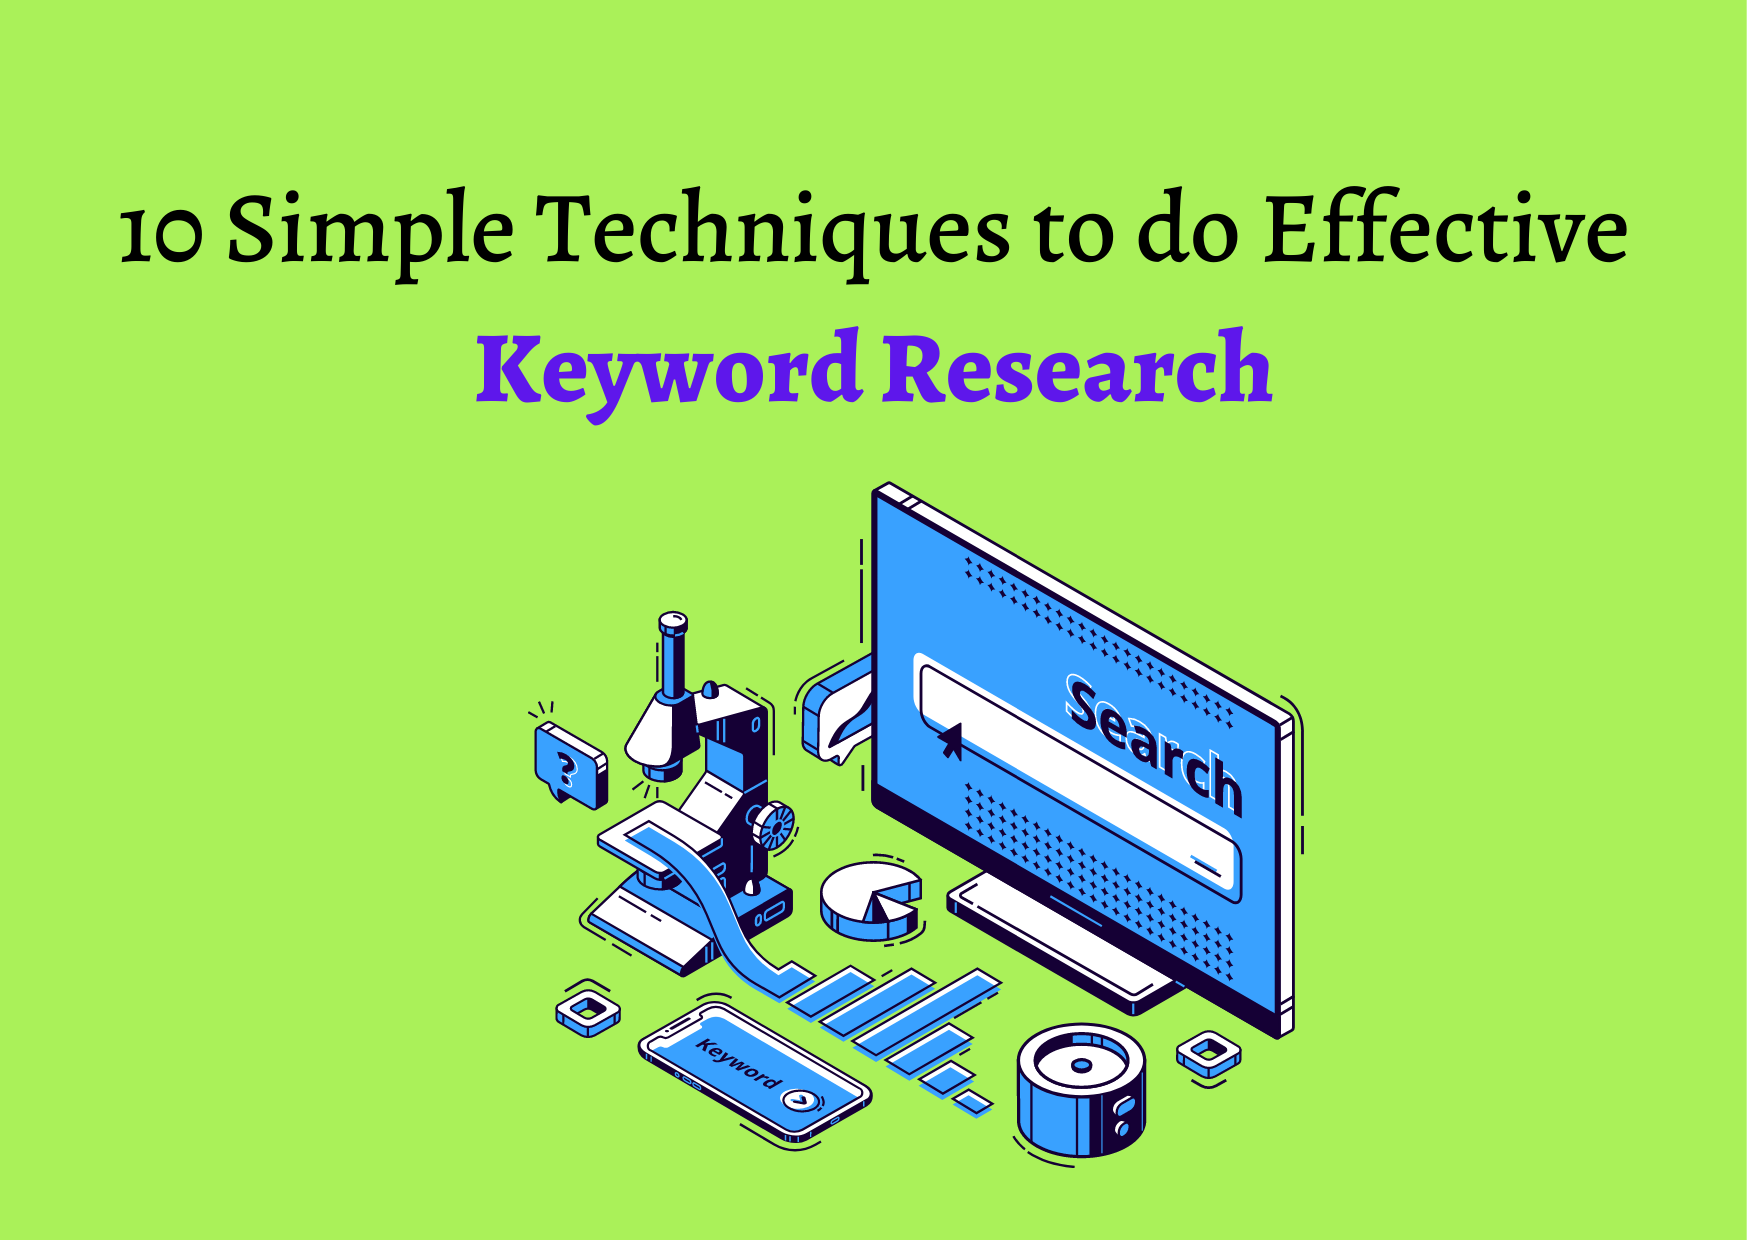 10 Simple Techniques to do Effective Keyword Research